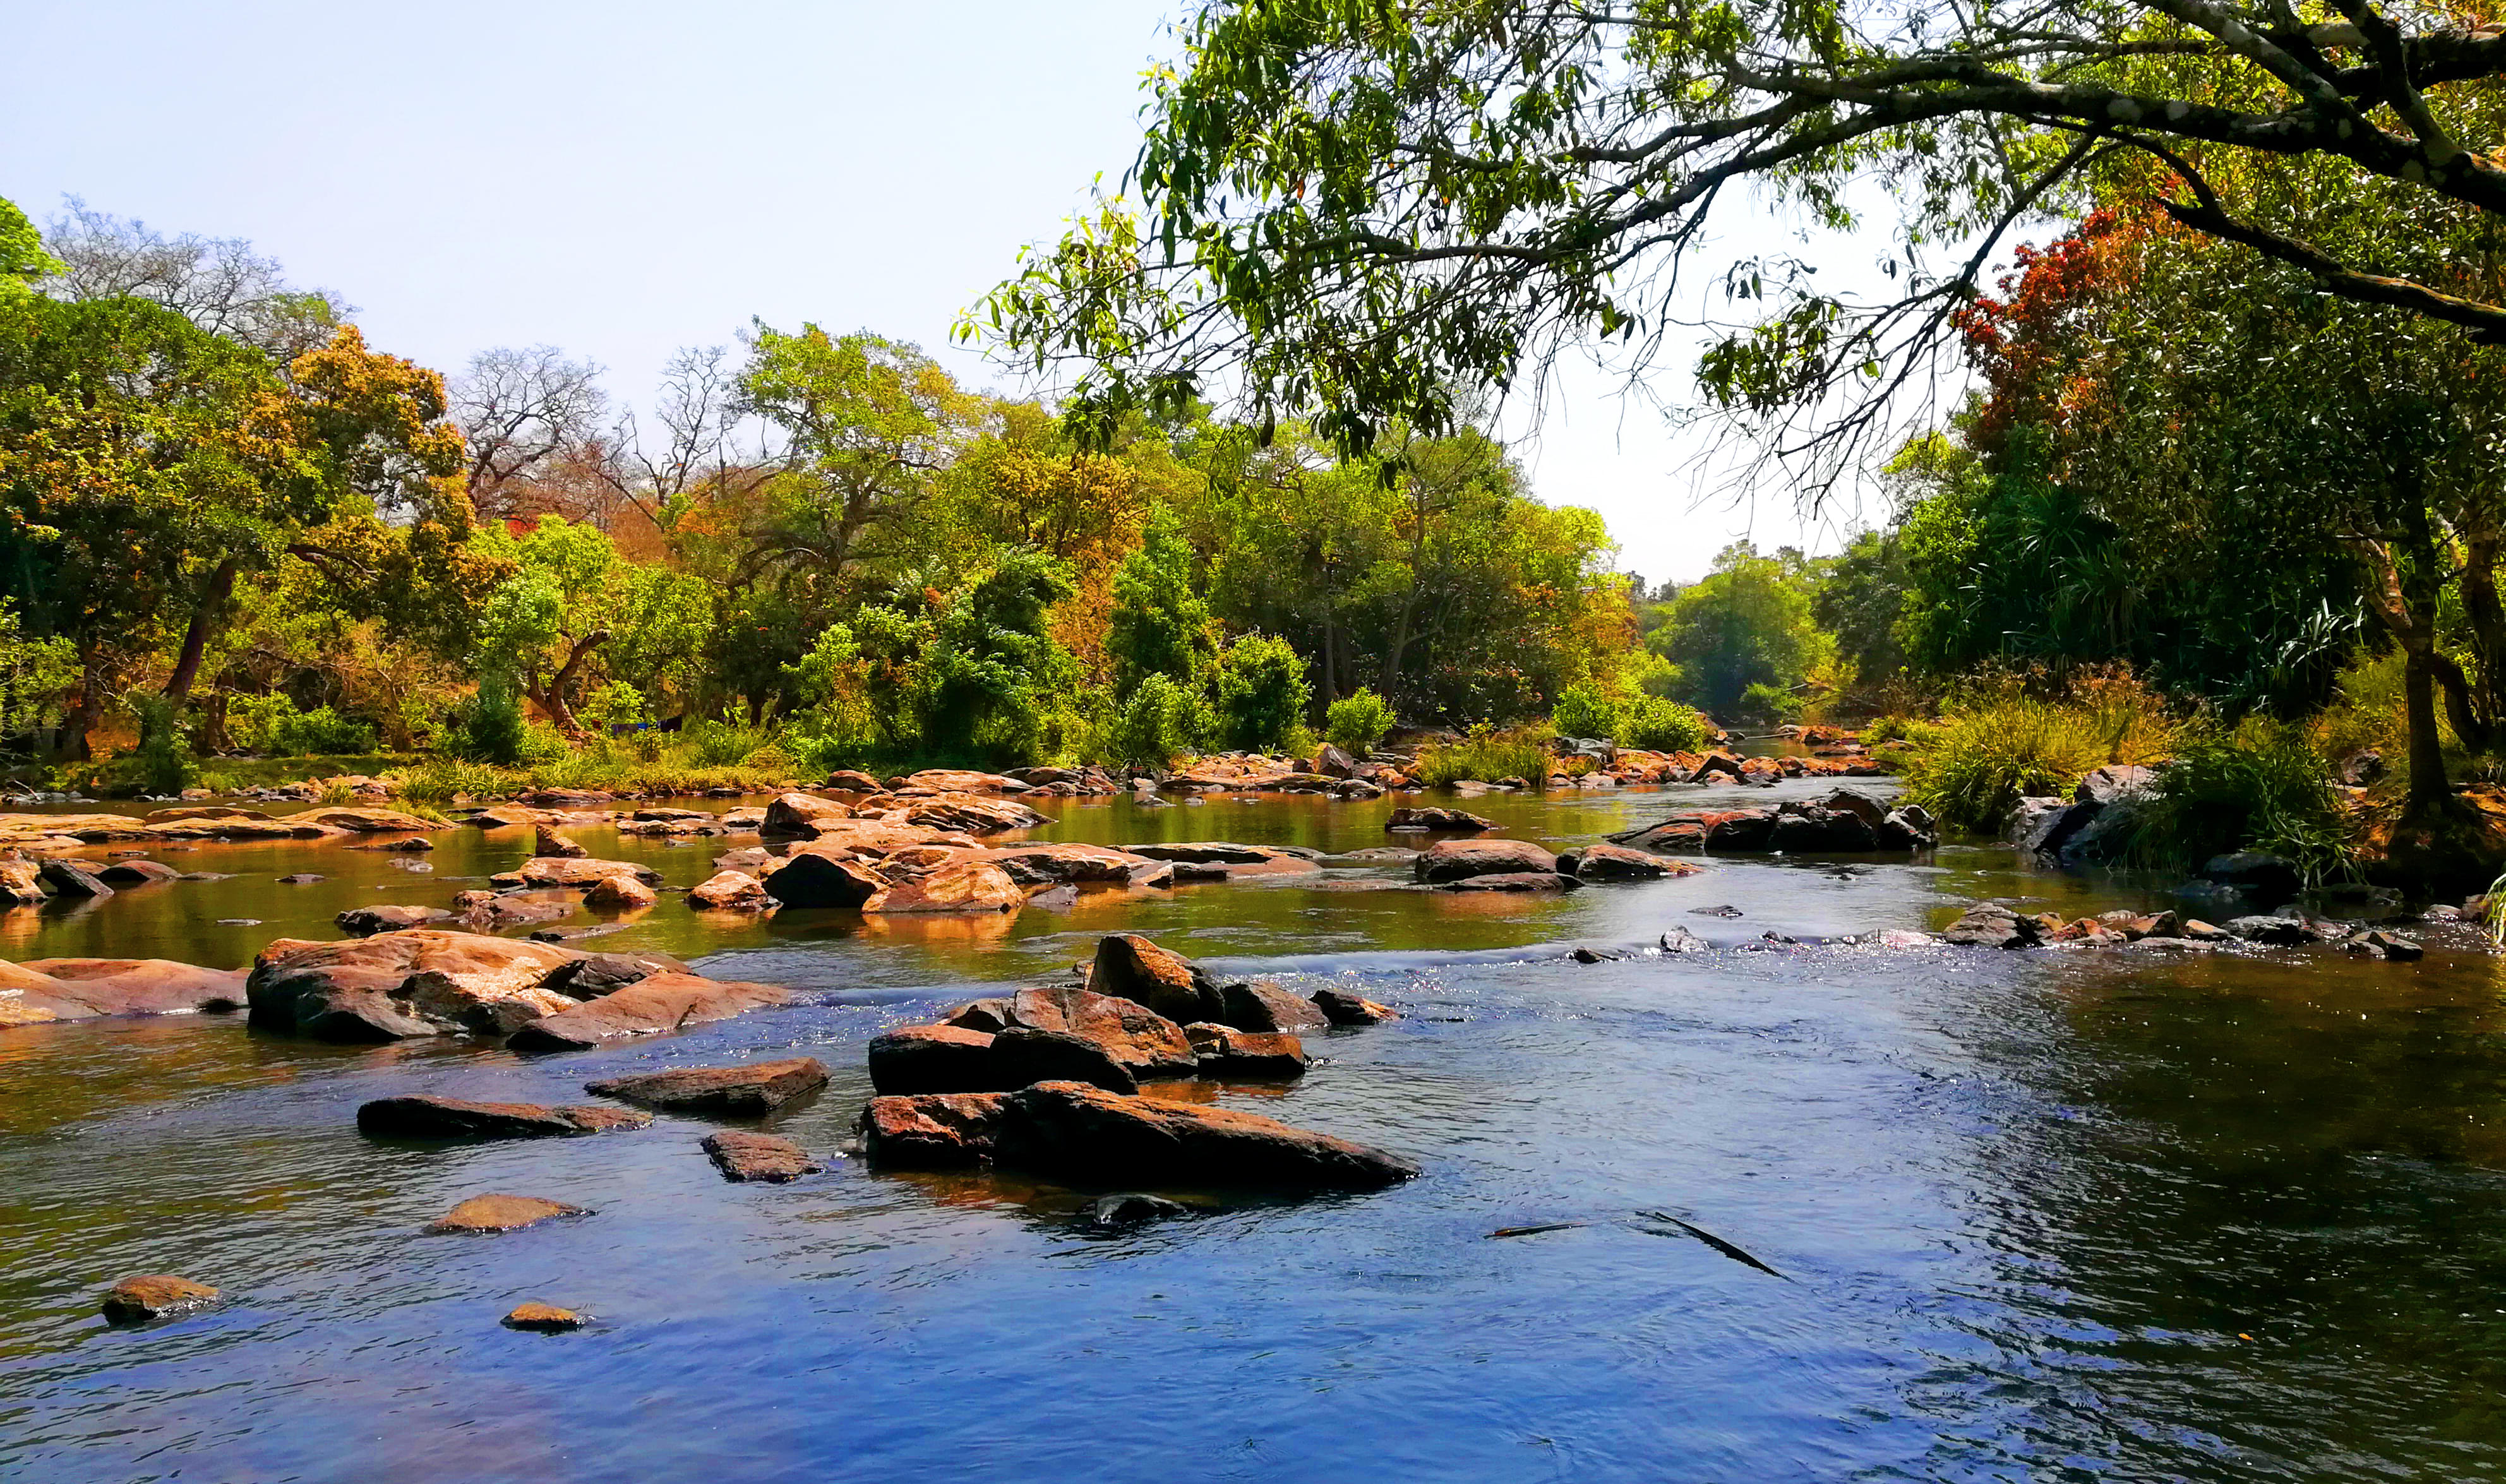 See Kuruva Island which is well-known for its diverse flora